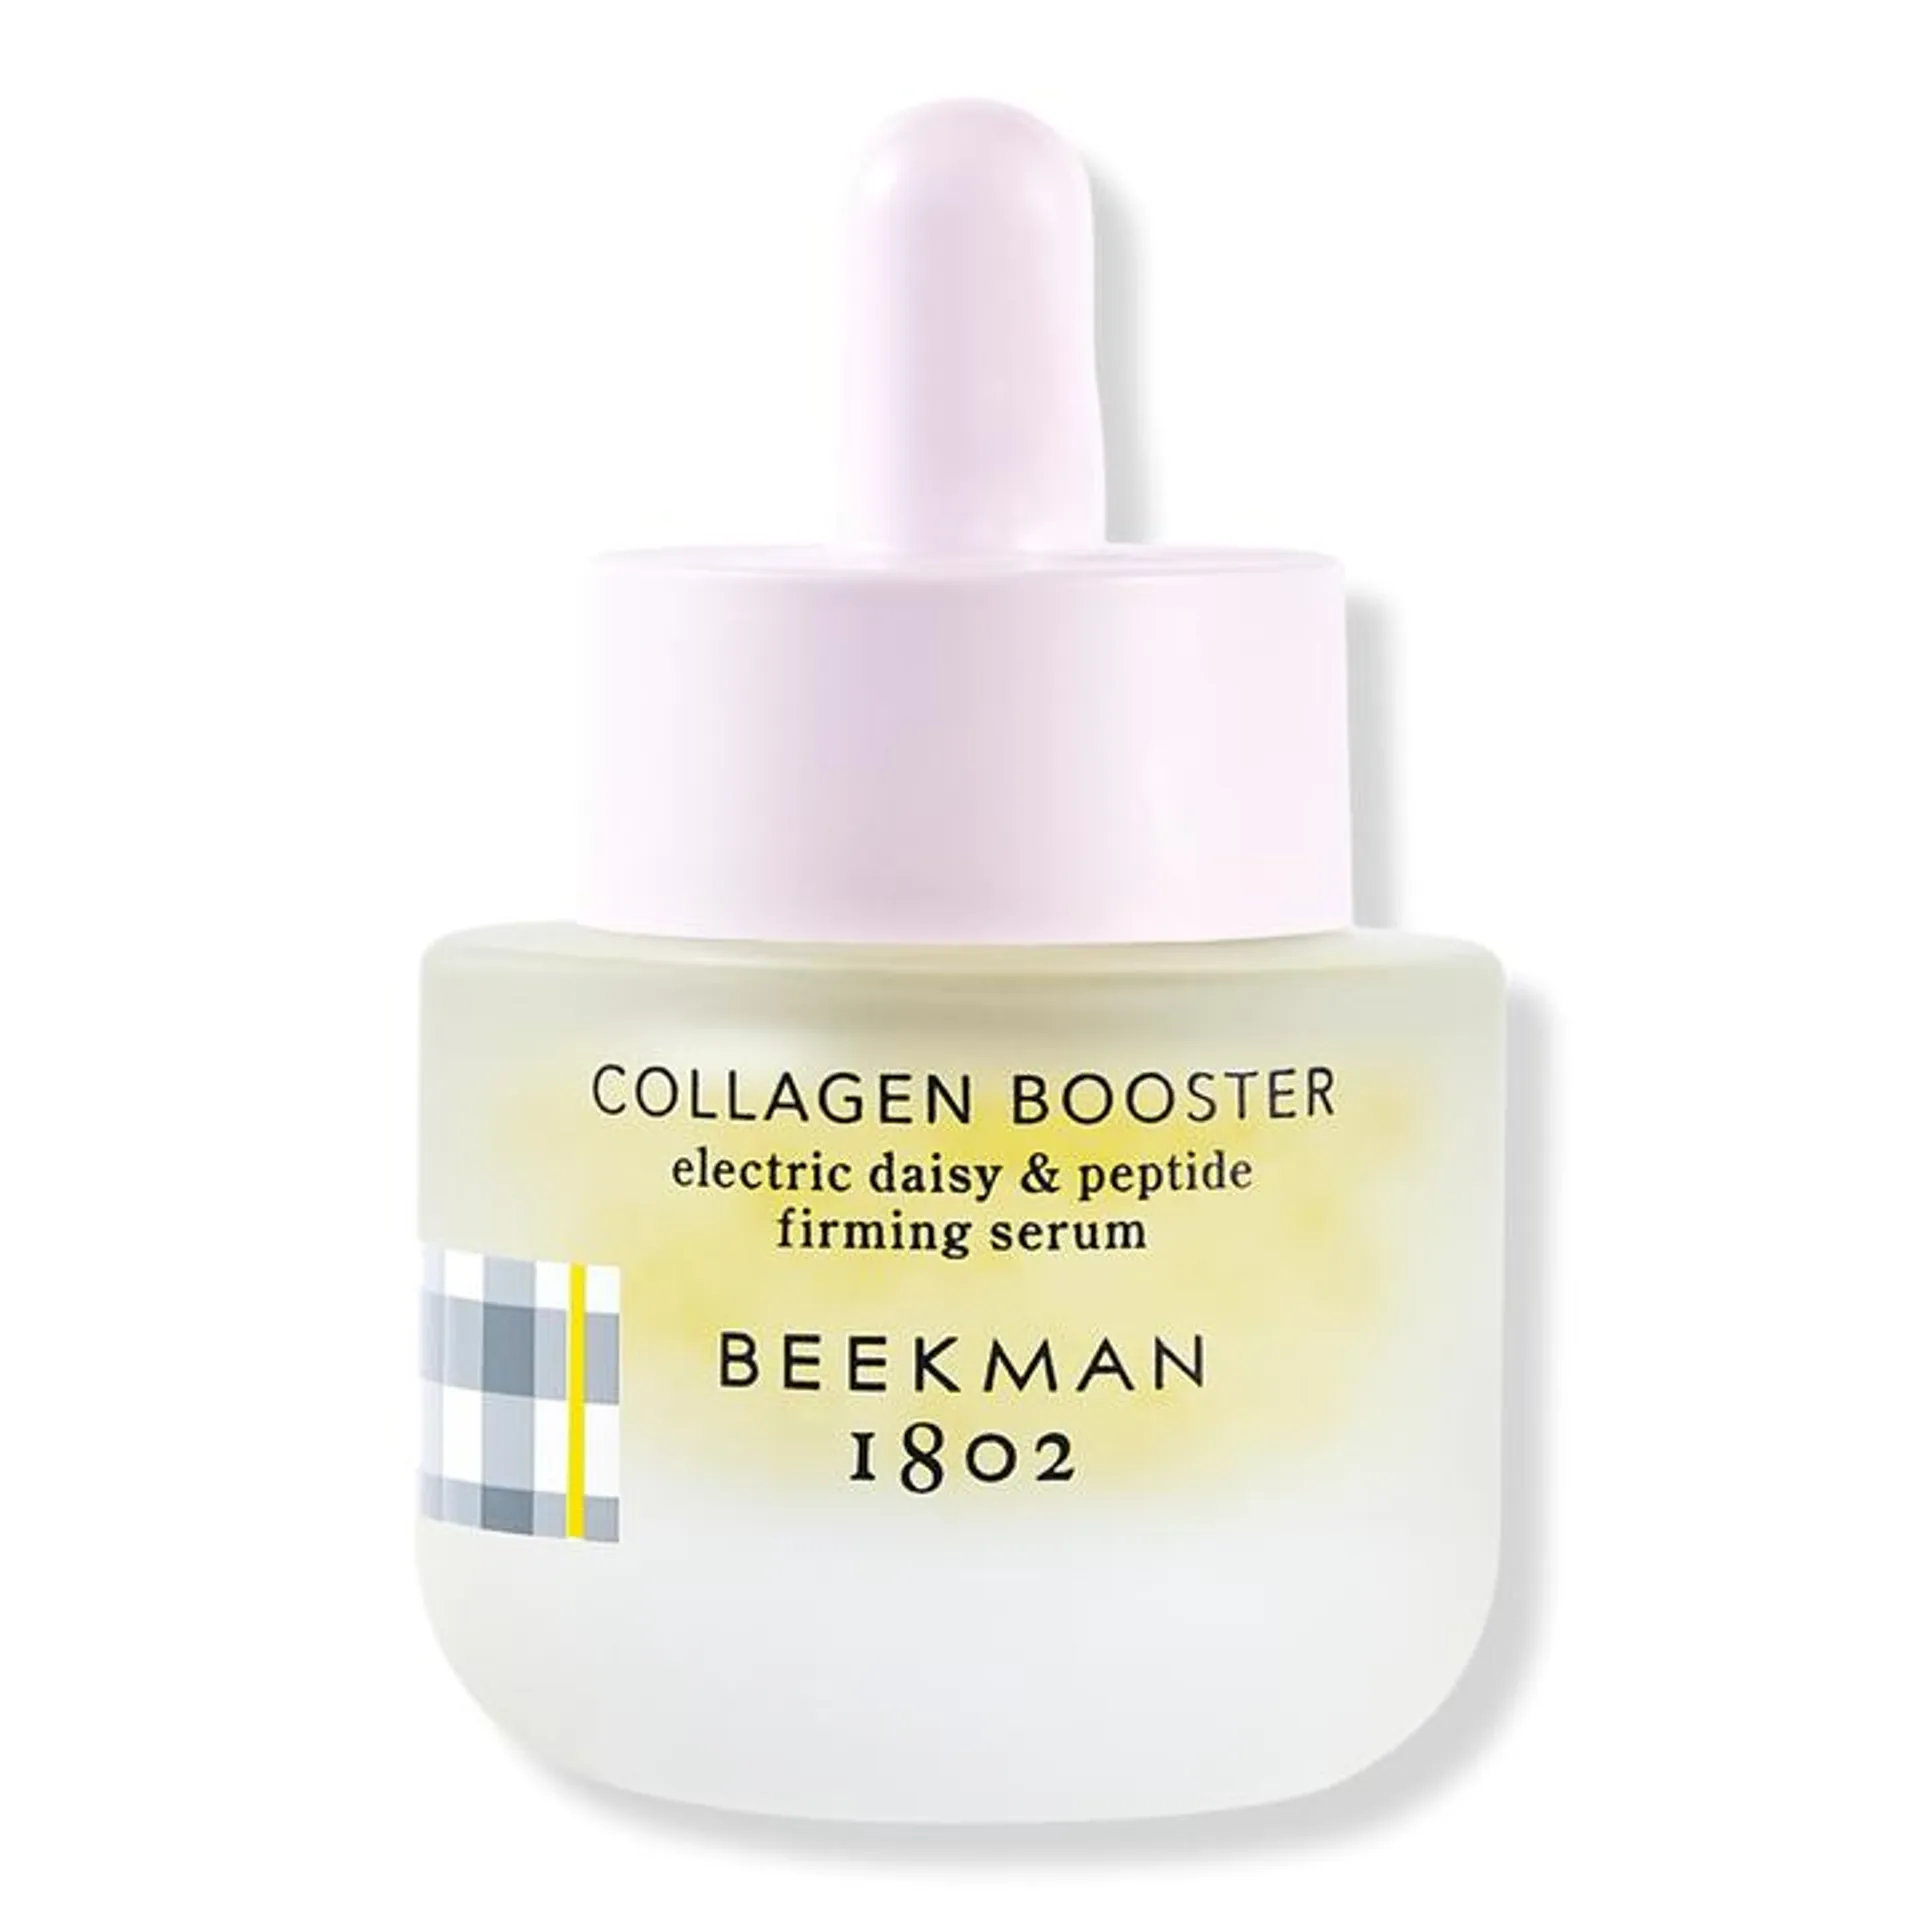 Collagen Booster Electric Daisy & Peptide Firming Serum